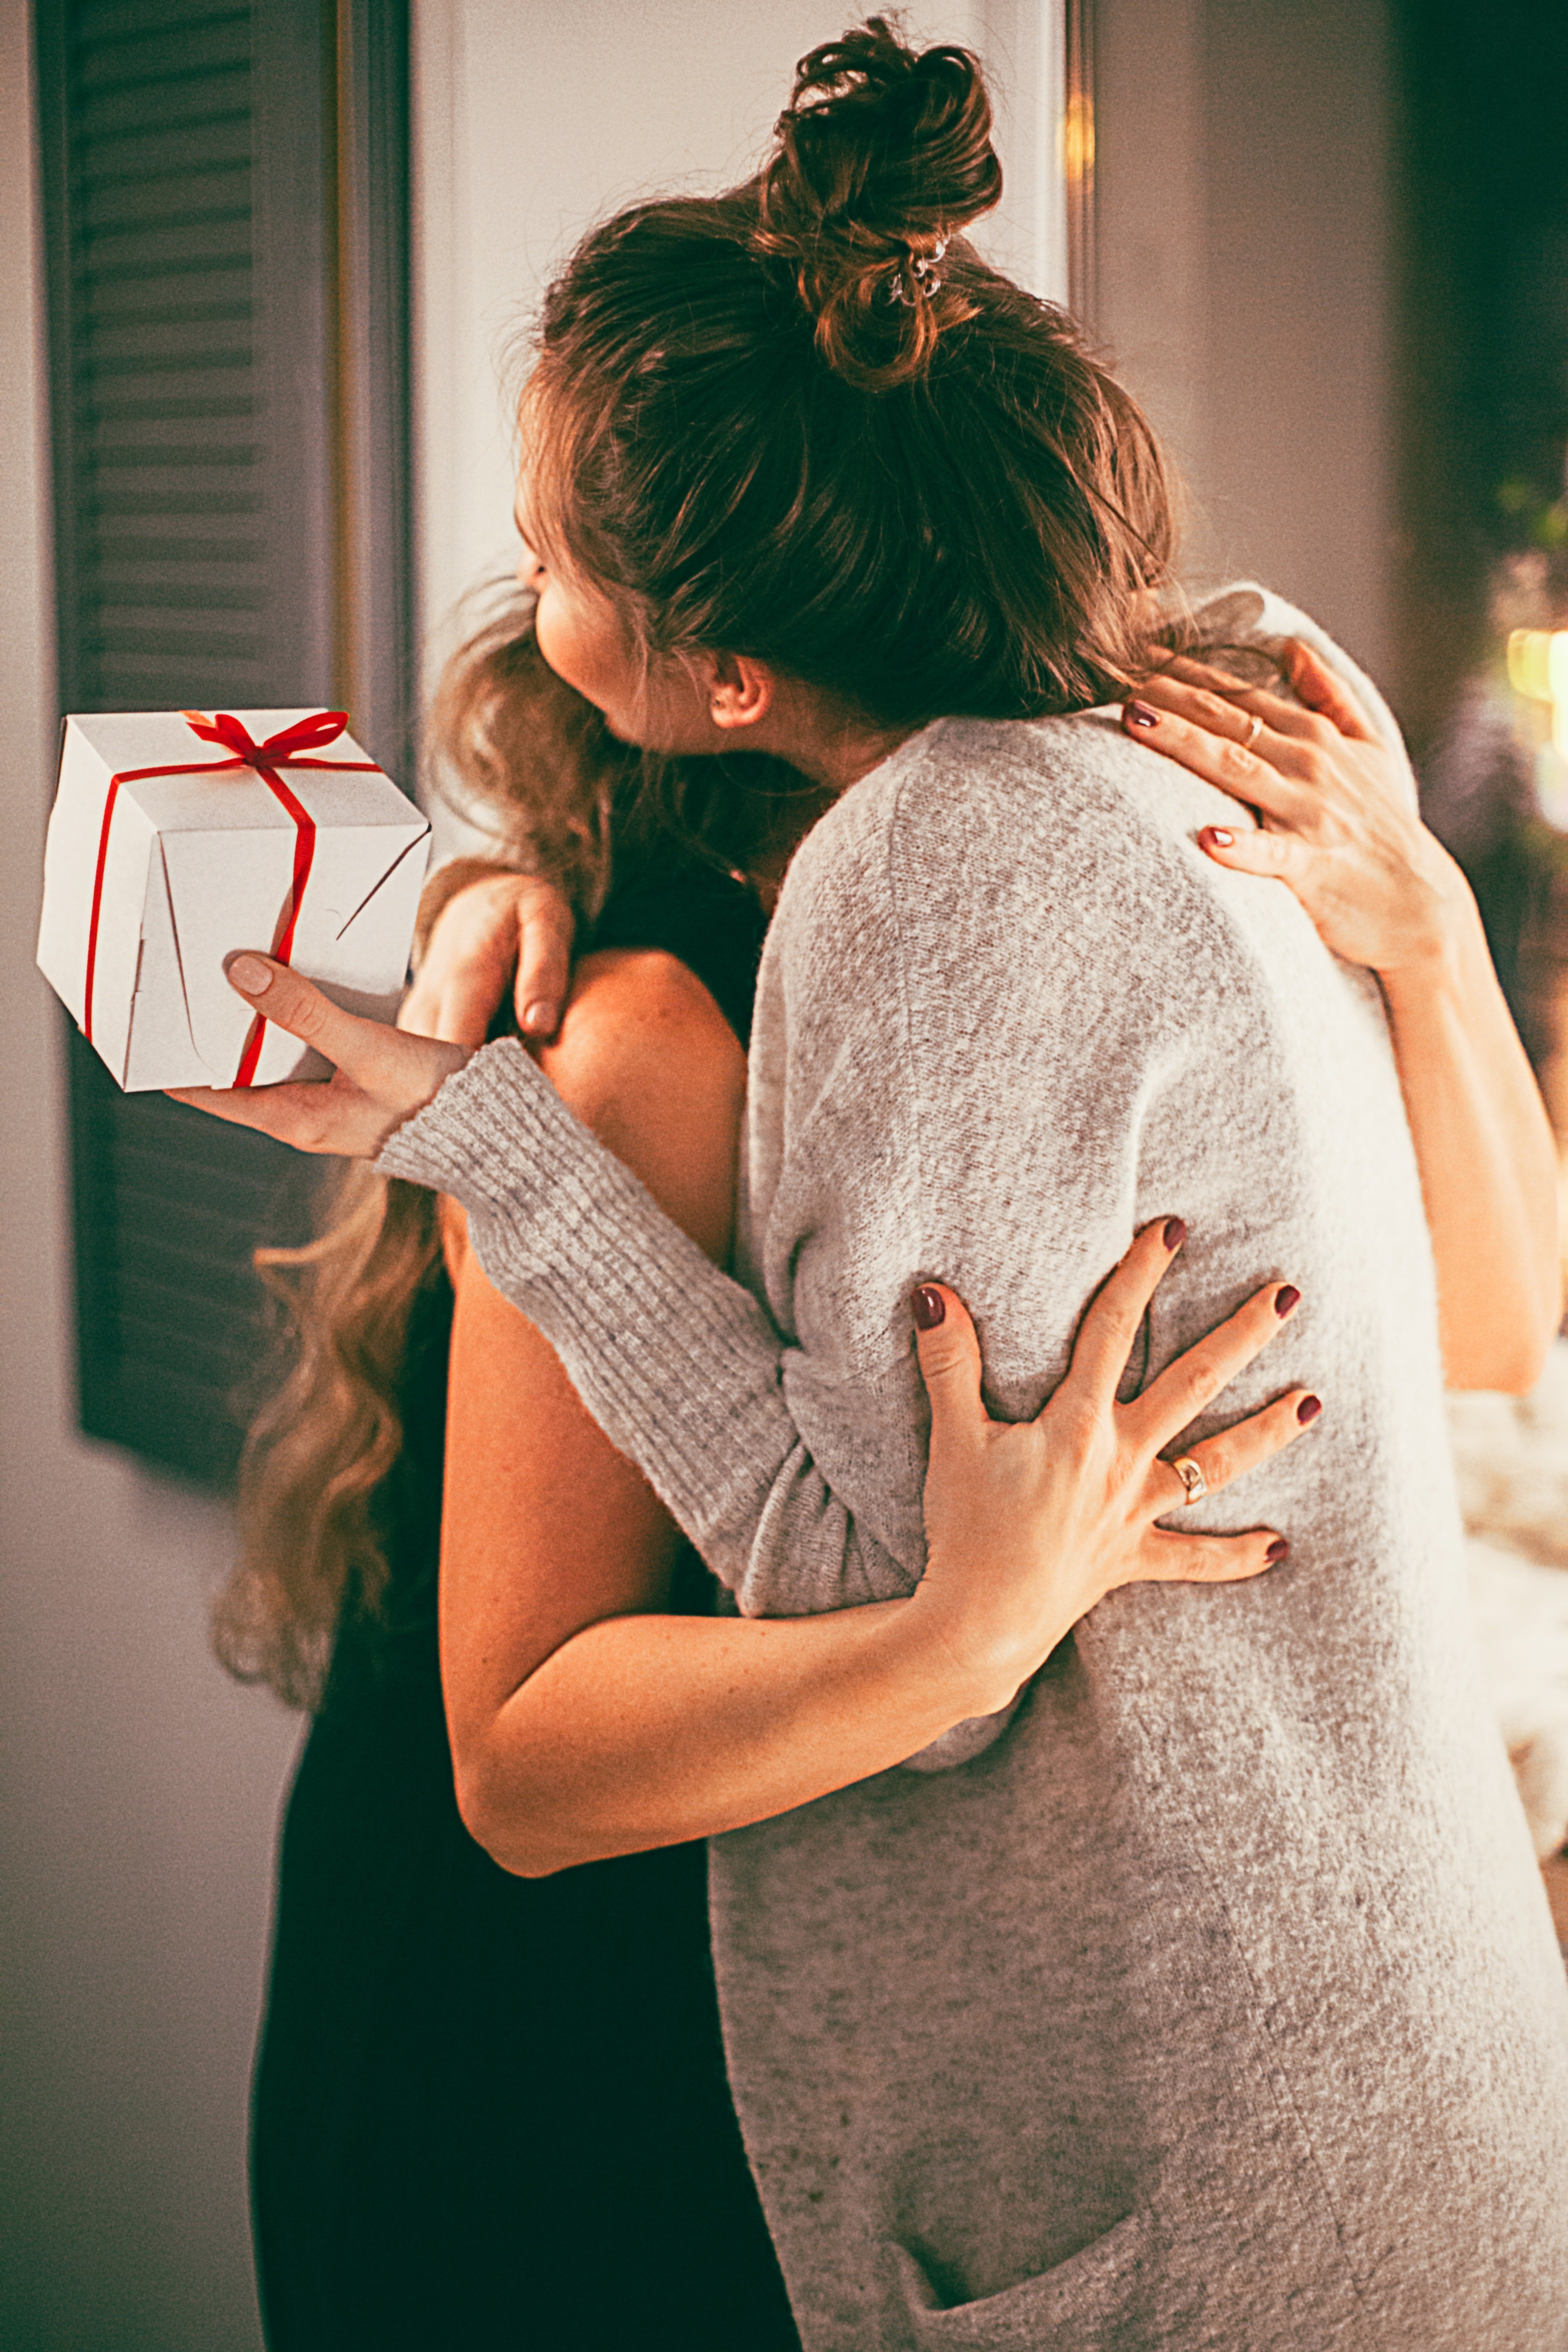 Two women embracing each other with gifts. | Source: Pixabay